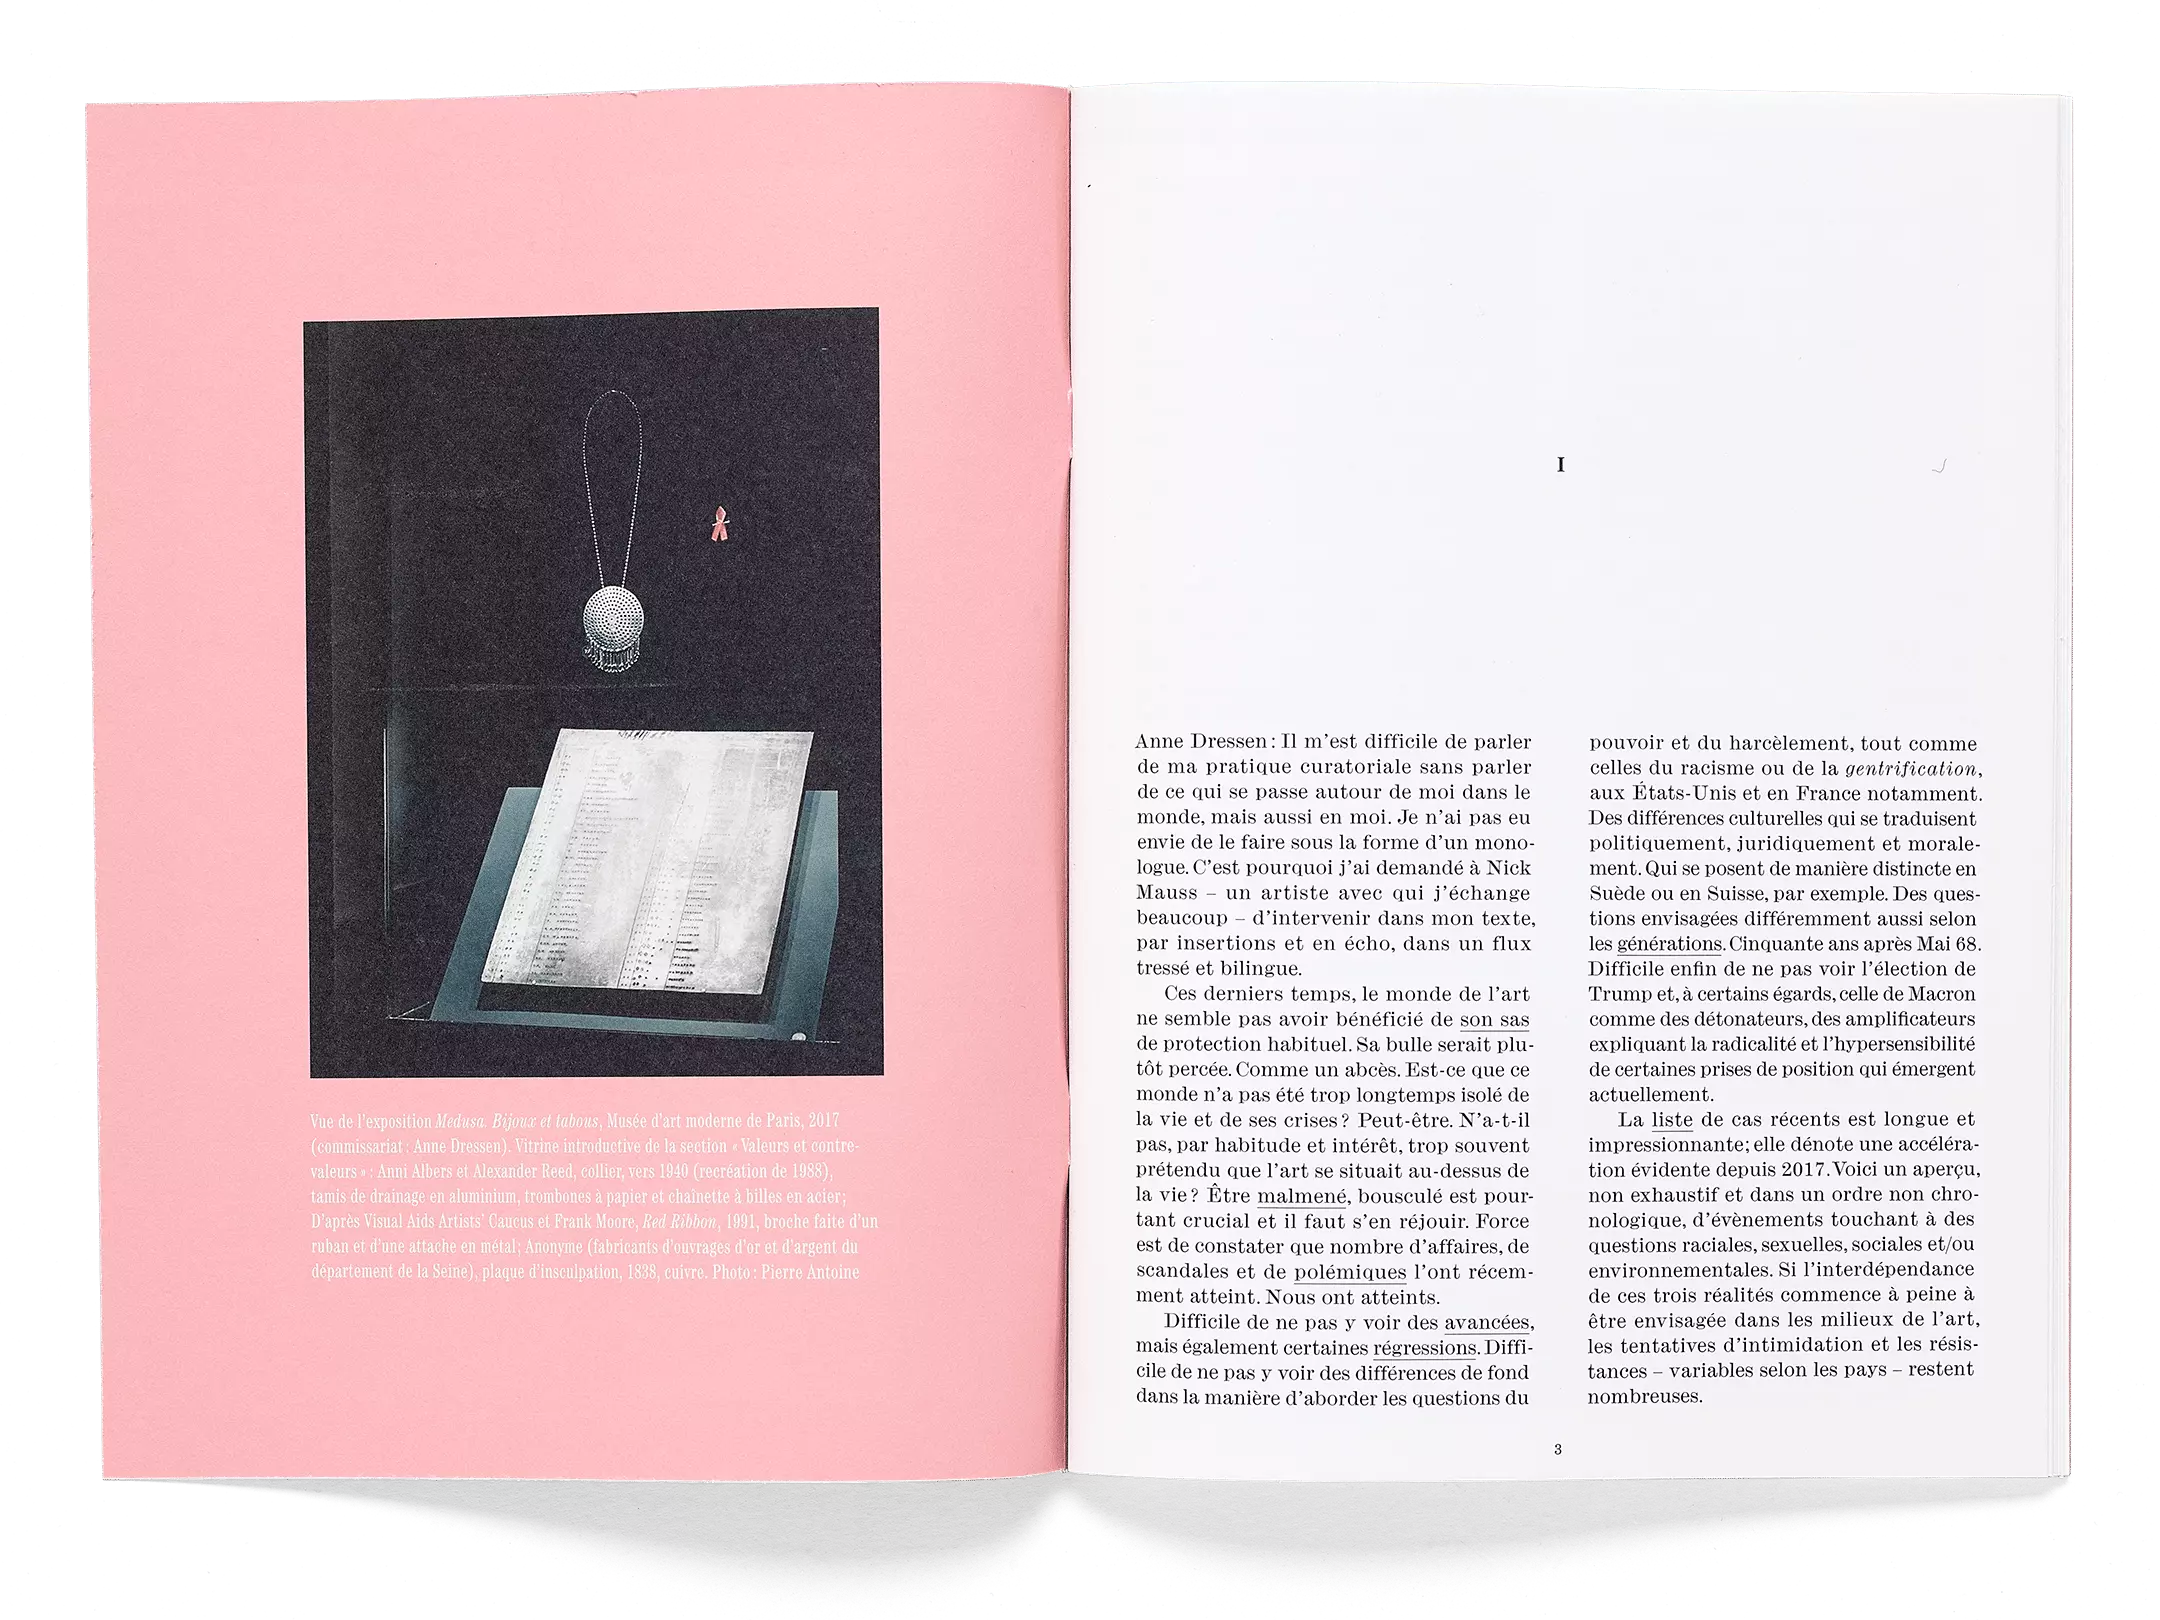 Spread of the publication “Anne Dressen in conversation with Nick Mauss”